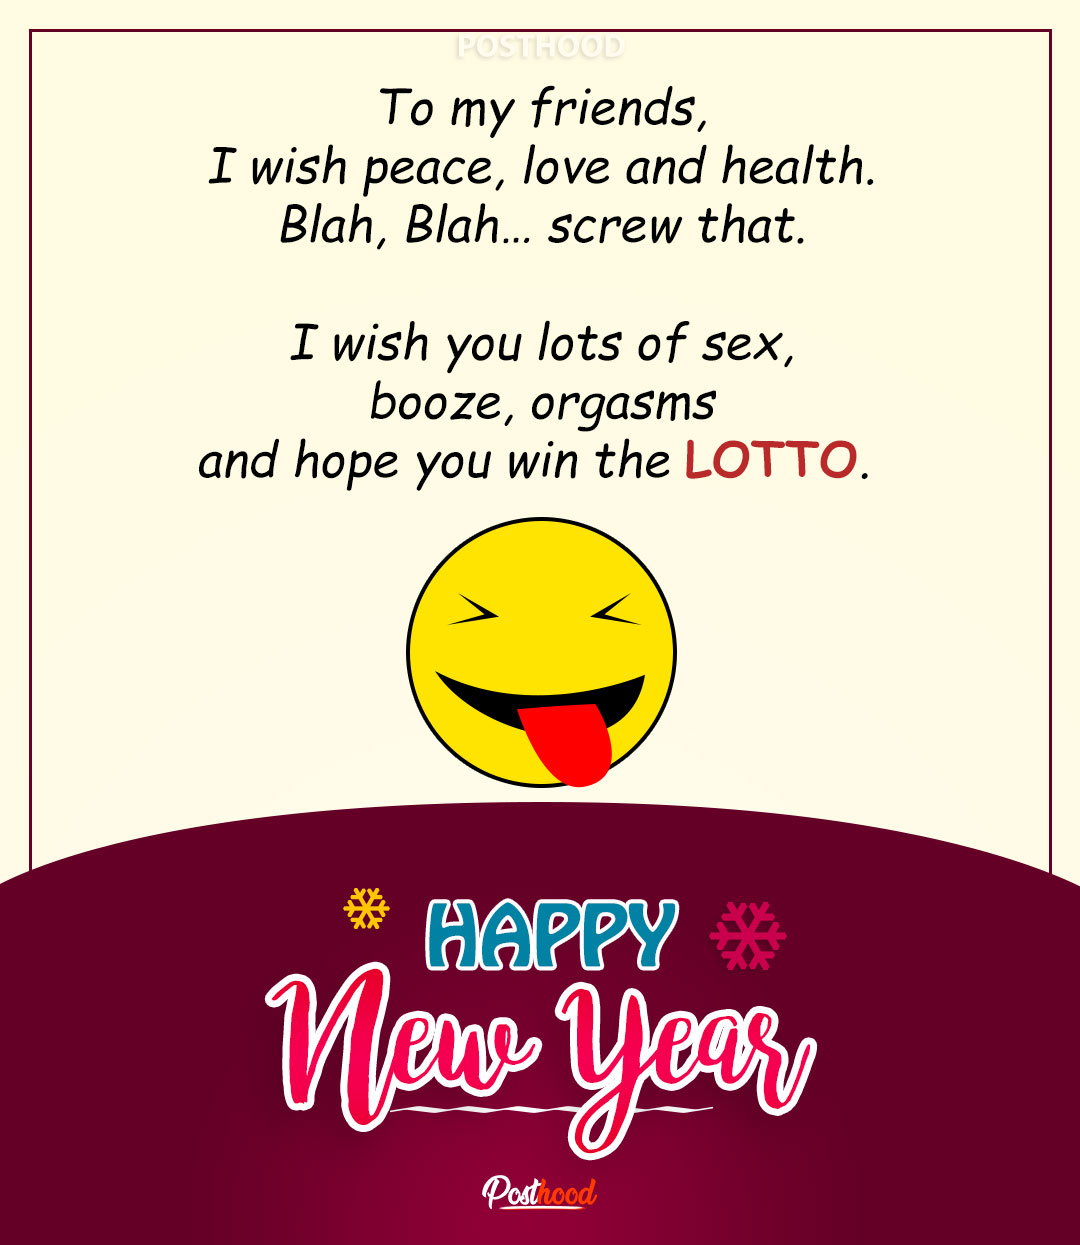 20 super hilarious and funny New Year wishes for friends and best buddy. These New Year messages will blow their mind and bring lots of fun to their life. 